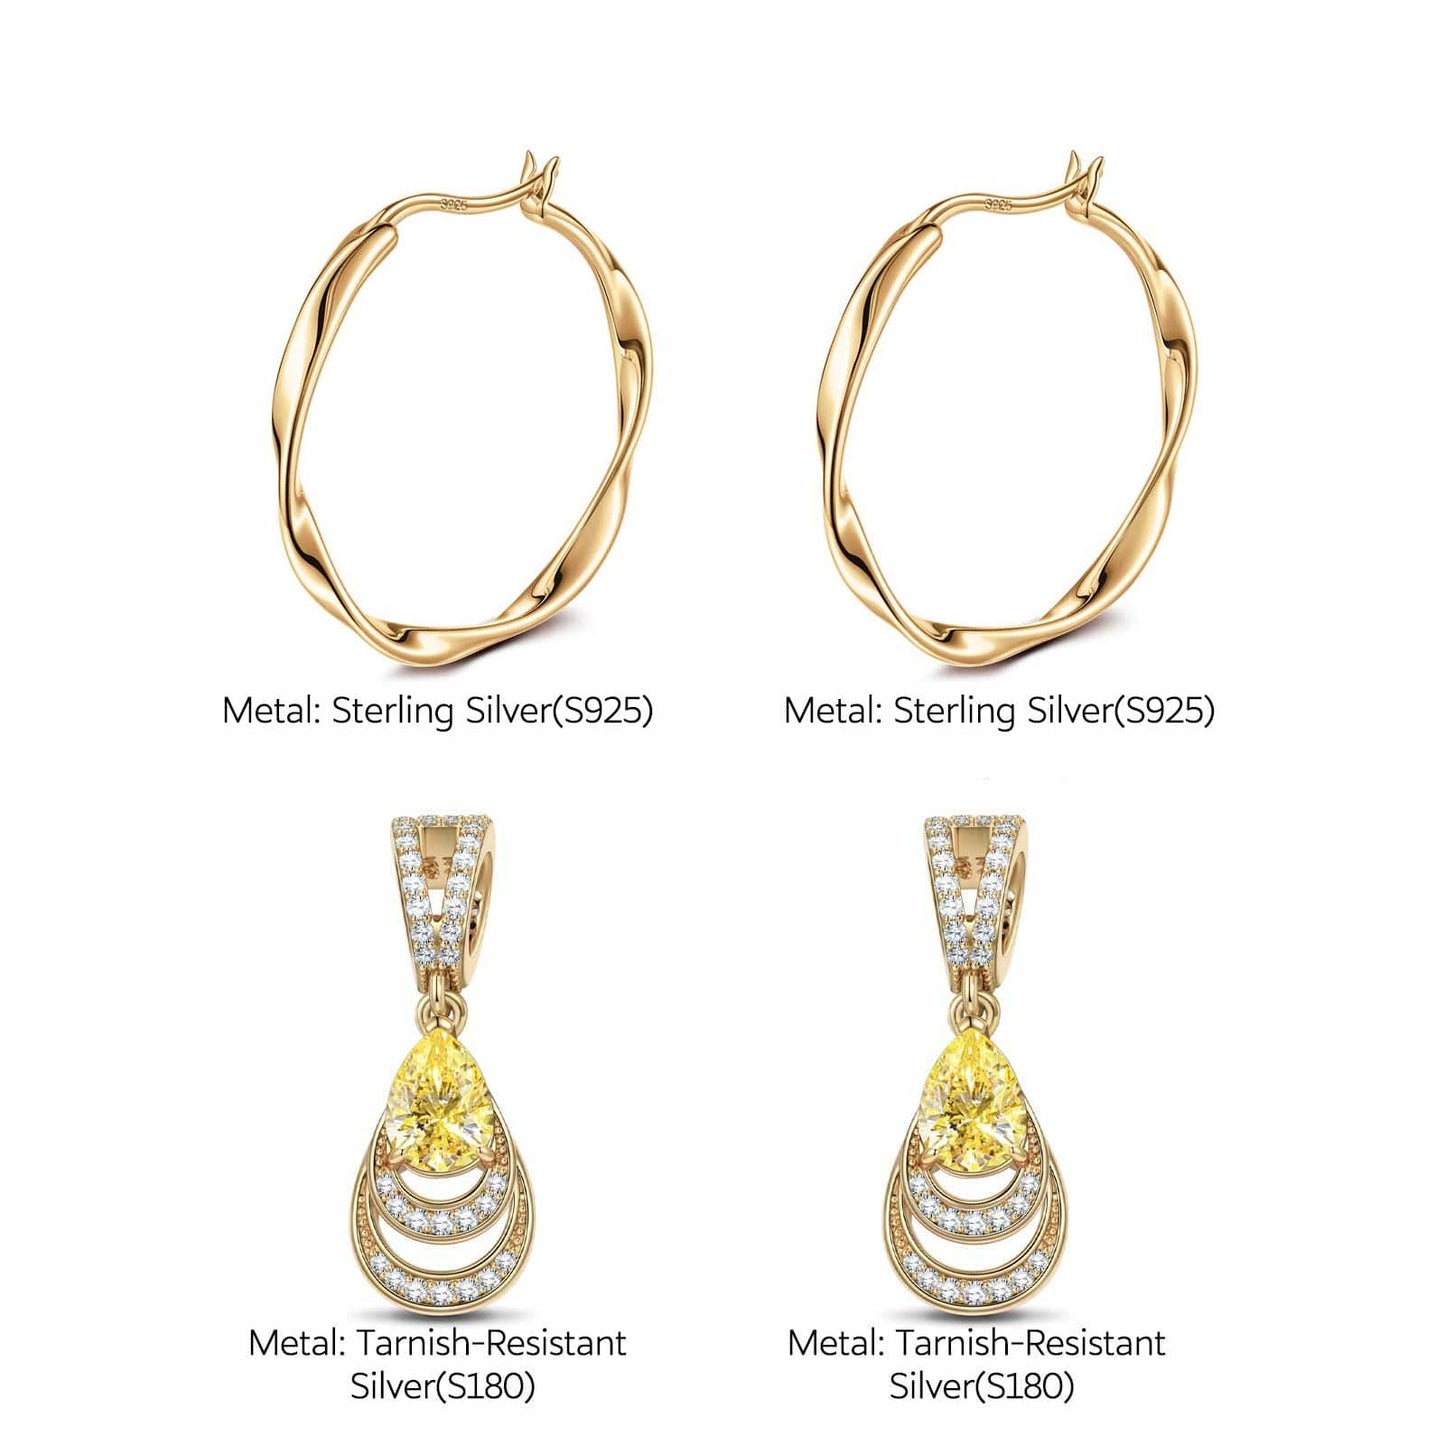 Sterling Silver Earrings with Mermaid's Tear Tarnish-resistant Silver Charms Earrings Set In 14K Gold Plated